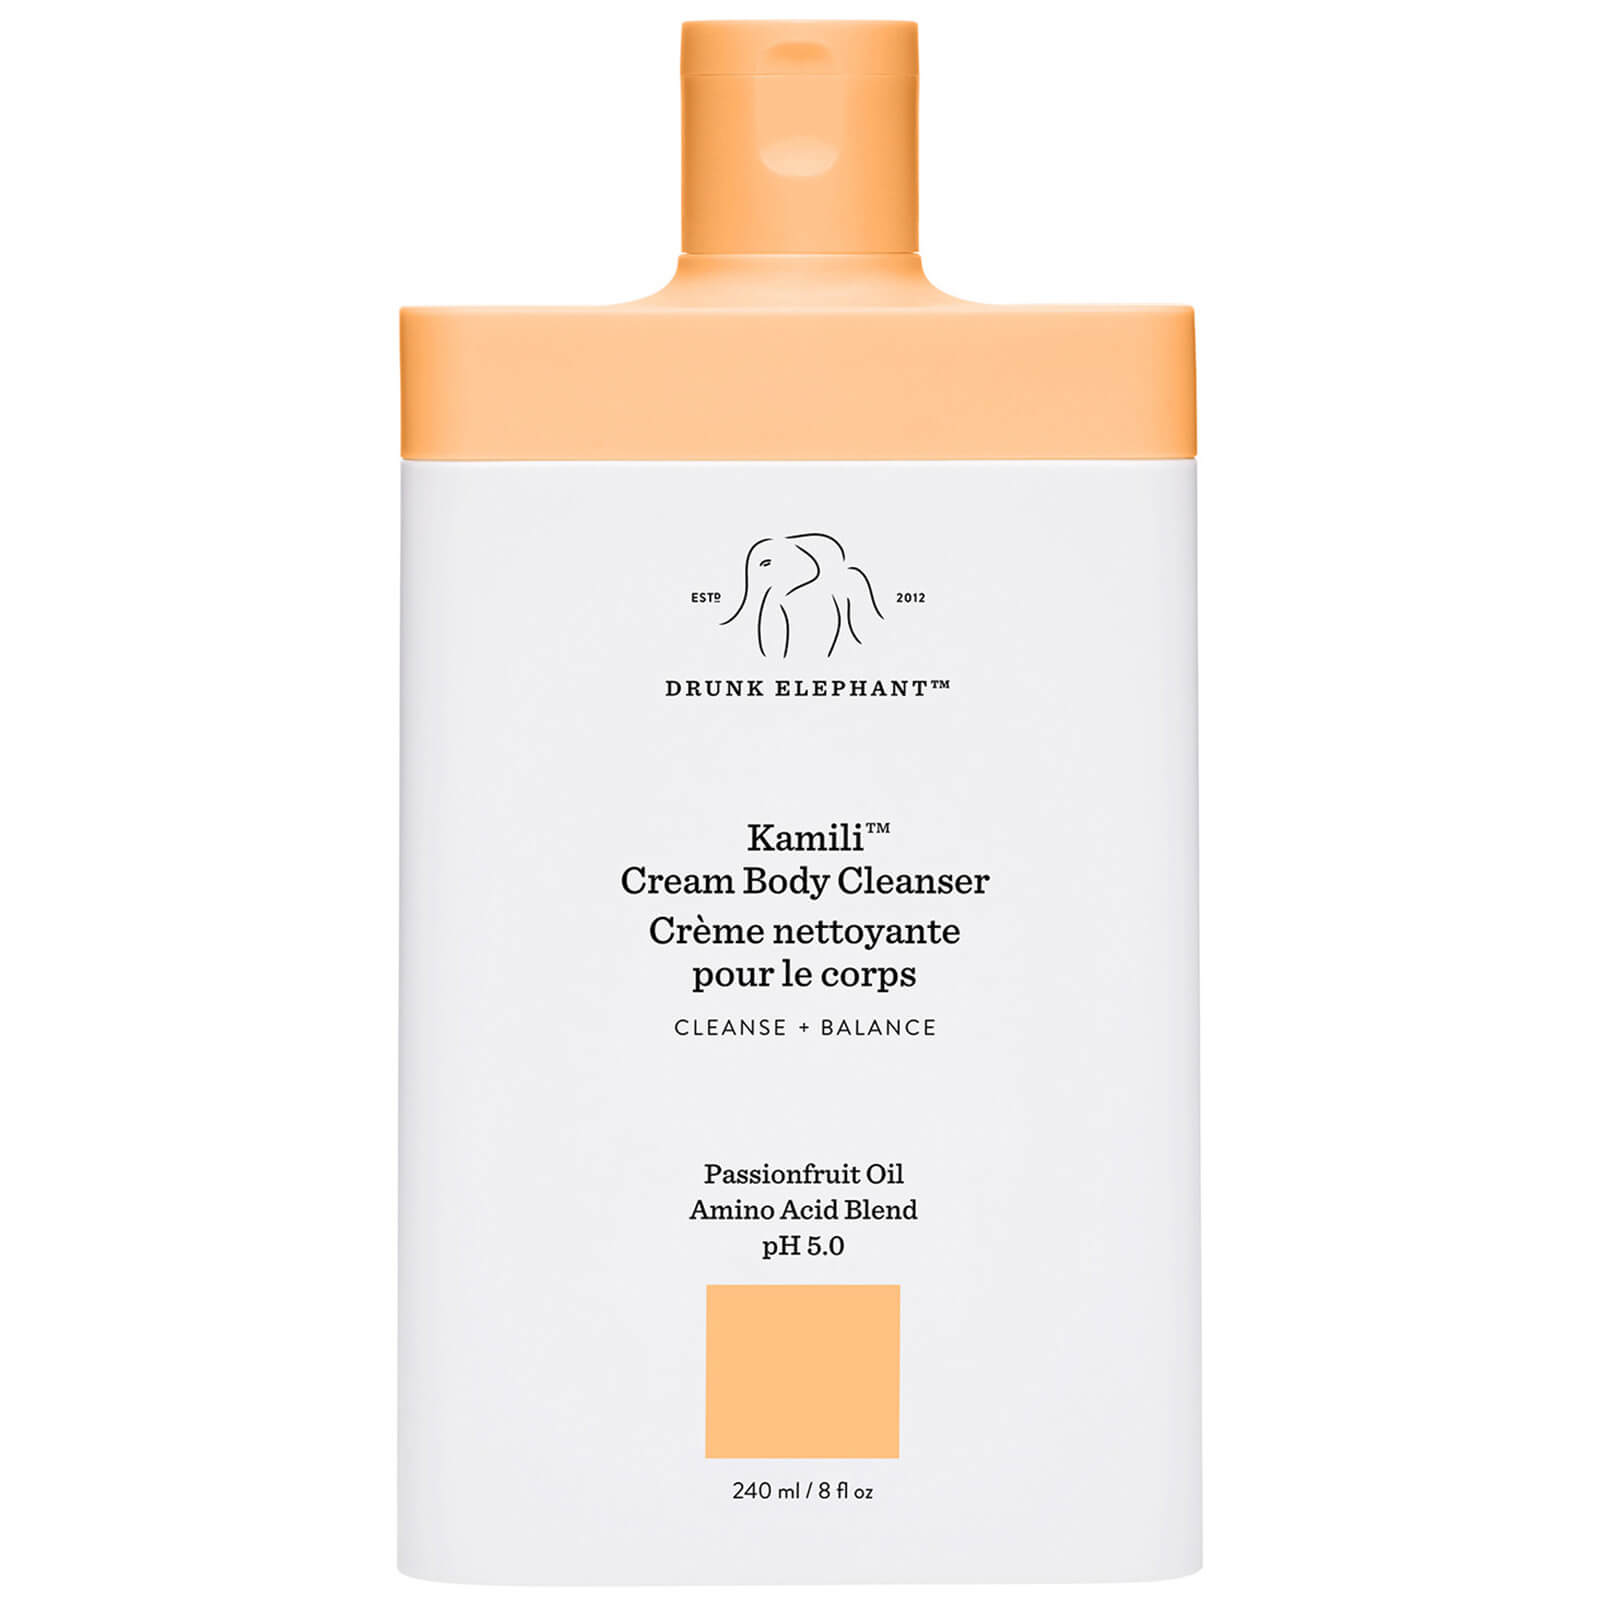 Photos - Facial / Body Cleansing Product Drunk Elephant Kamili Cream Body Cleanser 240ml 11-004